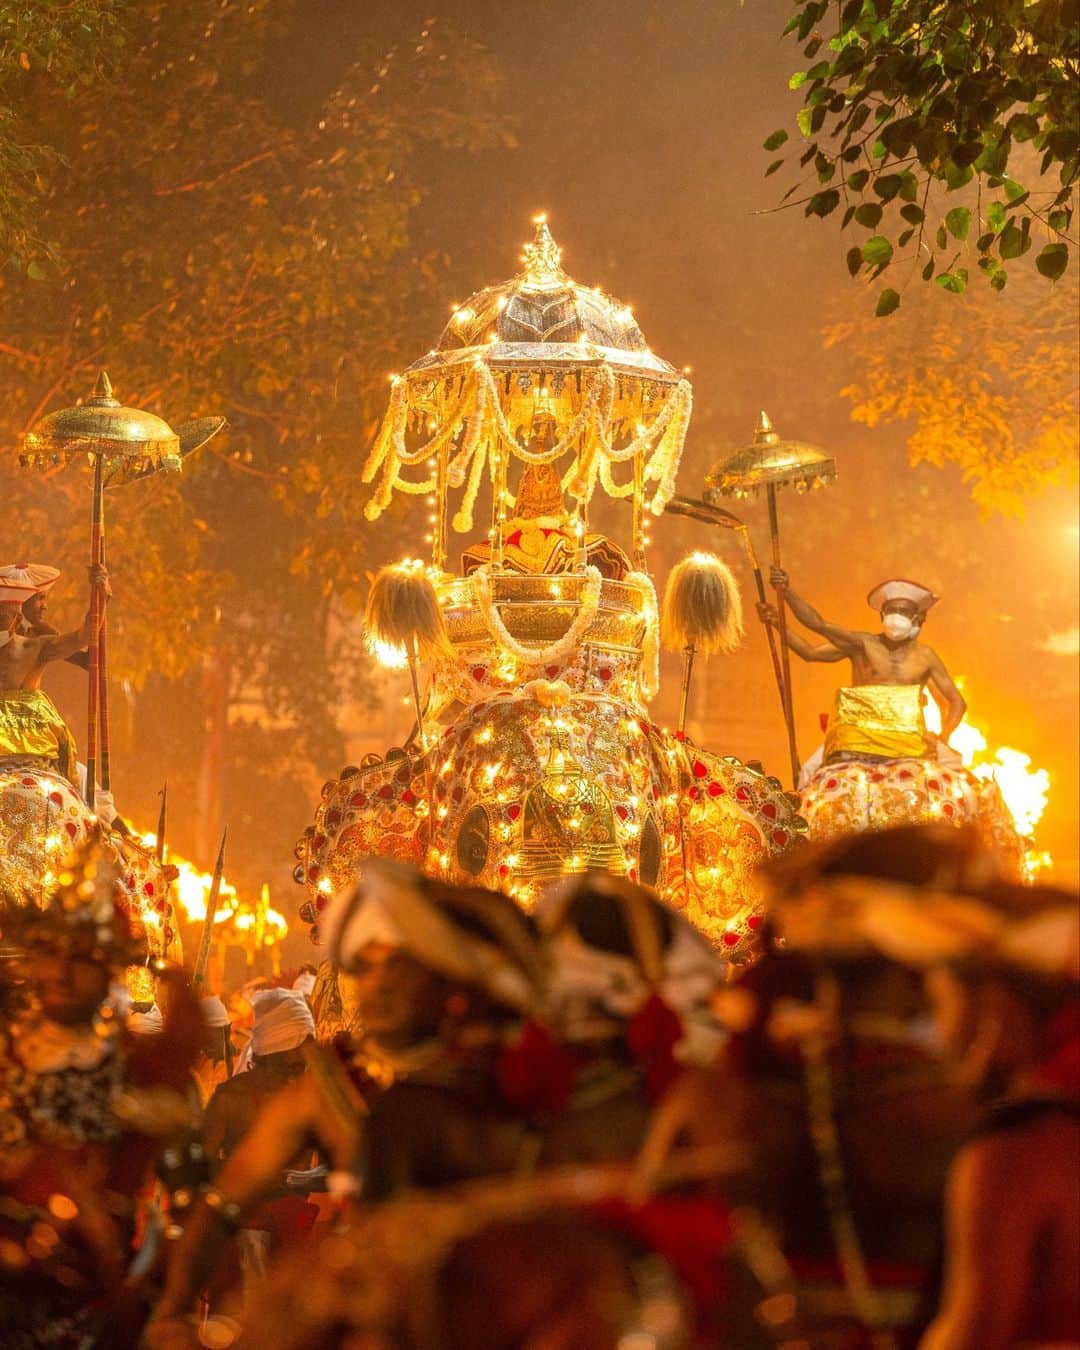 Canon Asiaのインスタグラム：「If there's one thing of which there is always plenty of during festivals, it's light! ✨ 🎊⁣ ⁣ @manilka.jayasingha.photography was fortunate enough to photograph the Sri Dalada Perahara procession in Kandy, Sri Lanka. Throughout this festival, sights such as 🔥 dances and 🐘 are commonplace. Still, one can hardly ever get used to witnessing a gilded pachyderm bearing a scared relic on its back!⁣ -⁣ 📷 Image by @manilka.jayasingha.photography on Canon EOS 6D | EF70-200mm f/2.8L IS USM III | 160mm | f/3.5 | ISO 2500 | 1/100s⁣ -⁣ #TeamCanon #CanonAsia #CanonPhotography #CanonPhoto #CanonImages #CanonLens #CanonColourScience #PhotoOfTheDay #IAmCanon #ThePhotoHour #TravelPhotography」